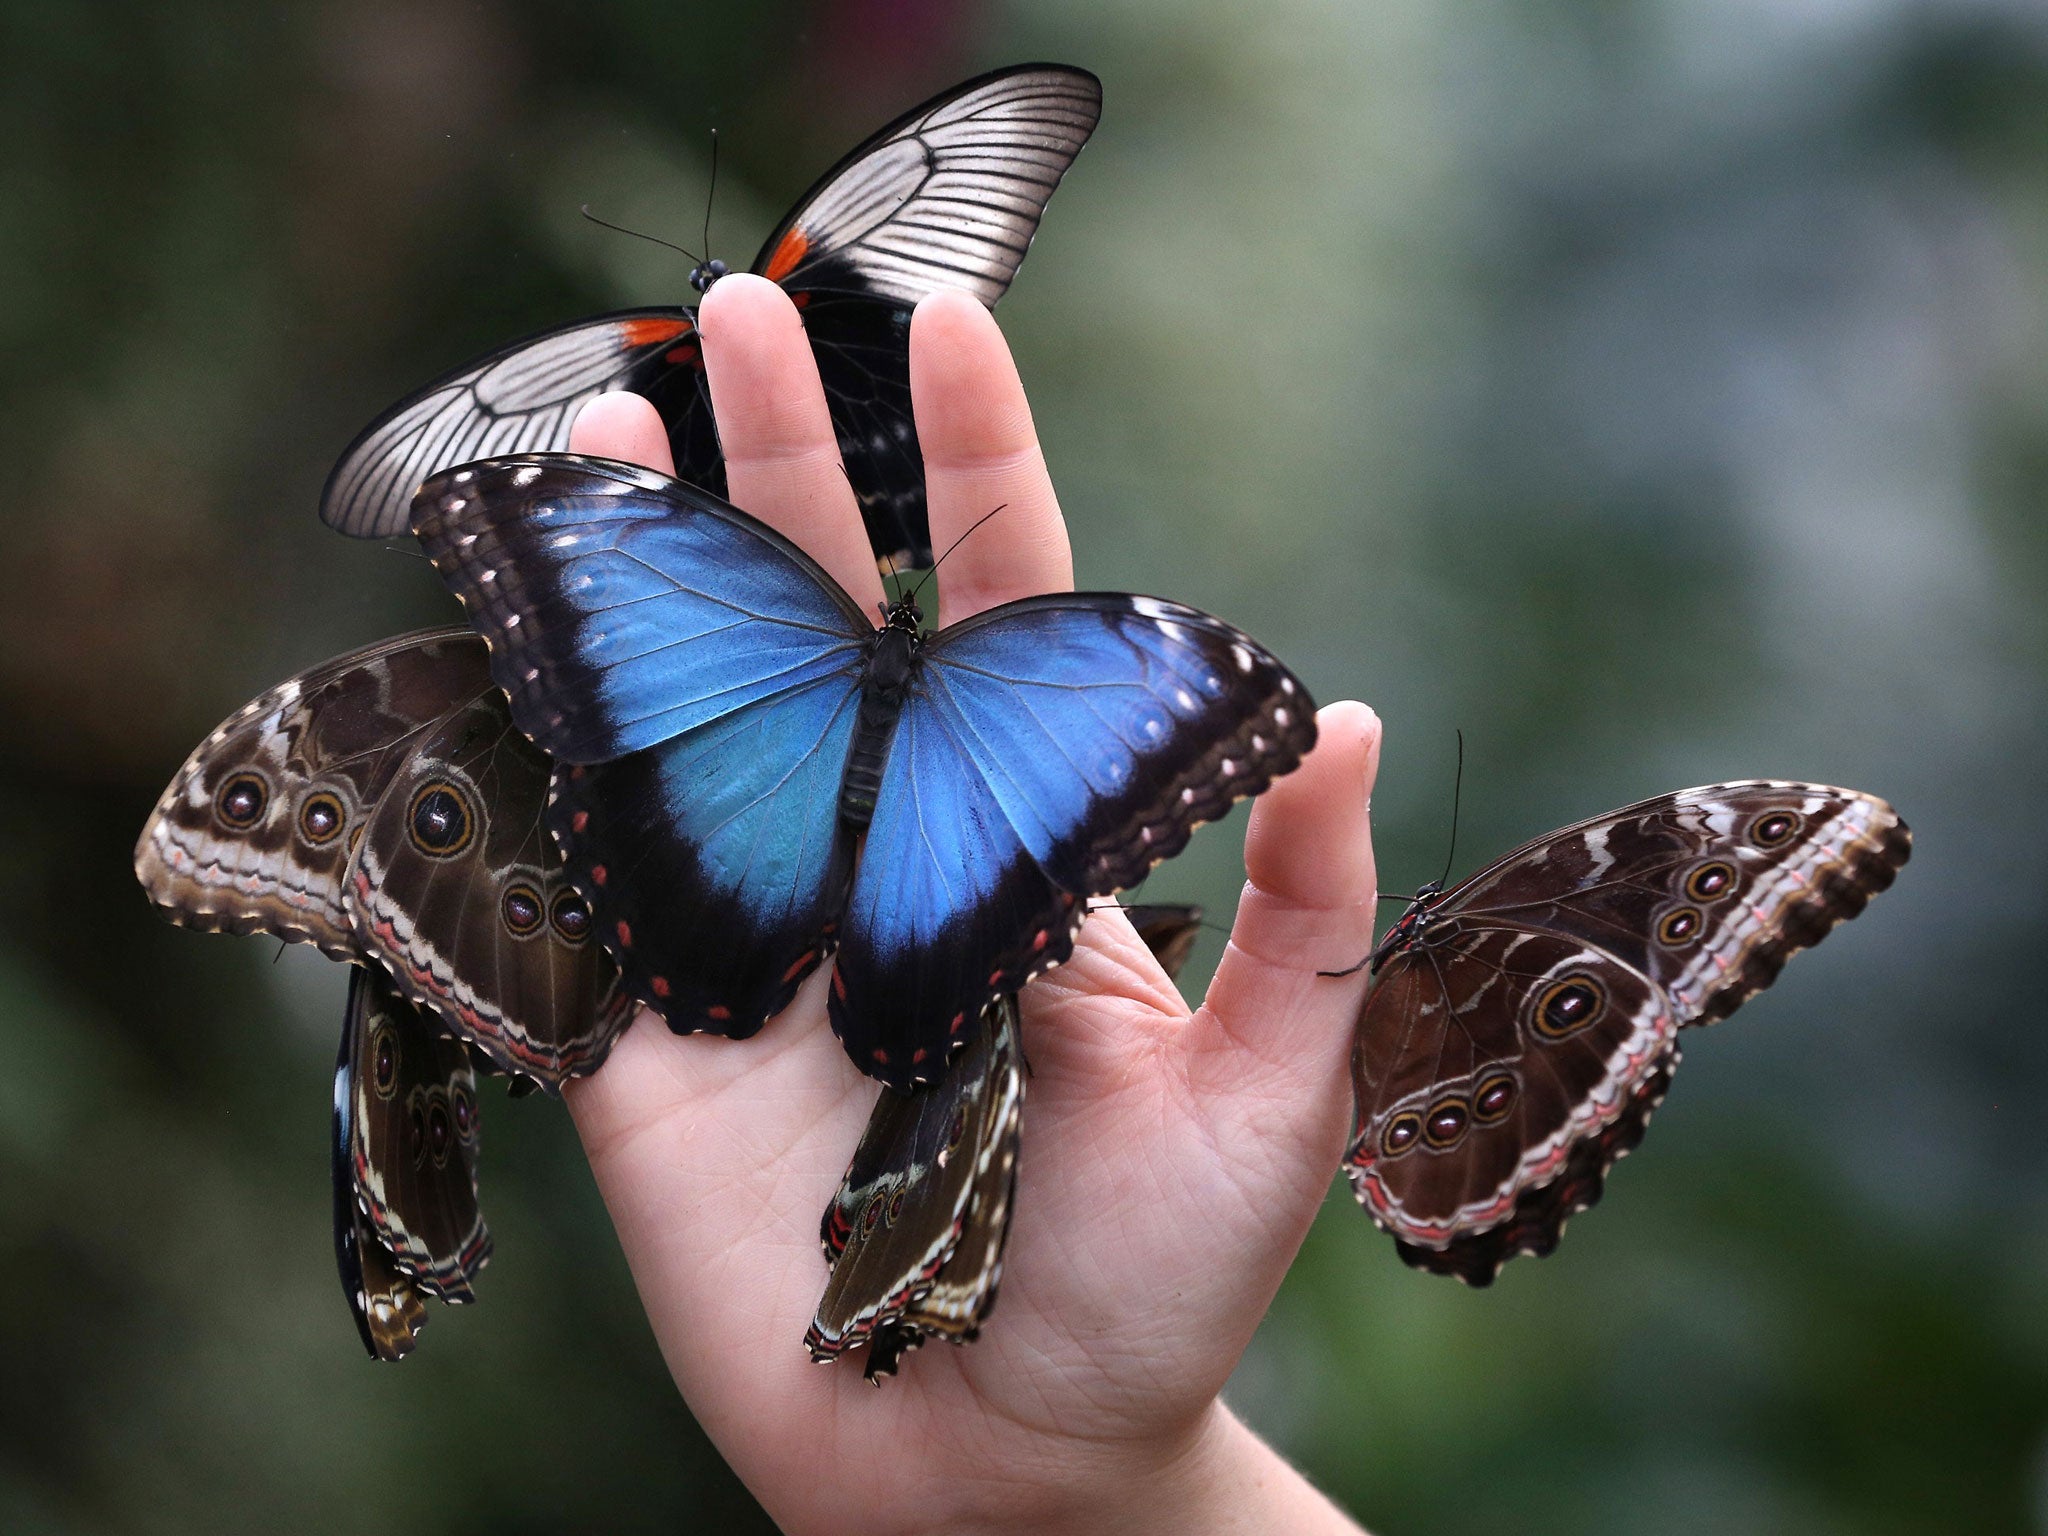 January 11, 2013: A member of staff holds a handful of butterflies at The Glasshouse at RHS Wisley Gardens near Woking. Rare and exotic butterflies have been placed in The Glasshouse for visitors from until February 24